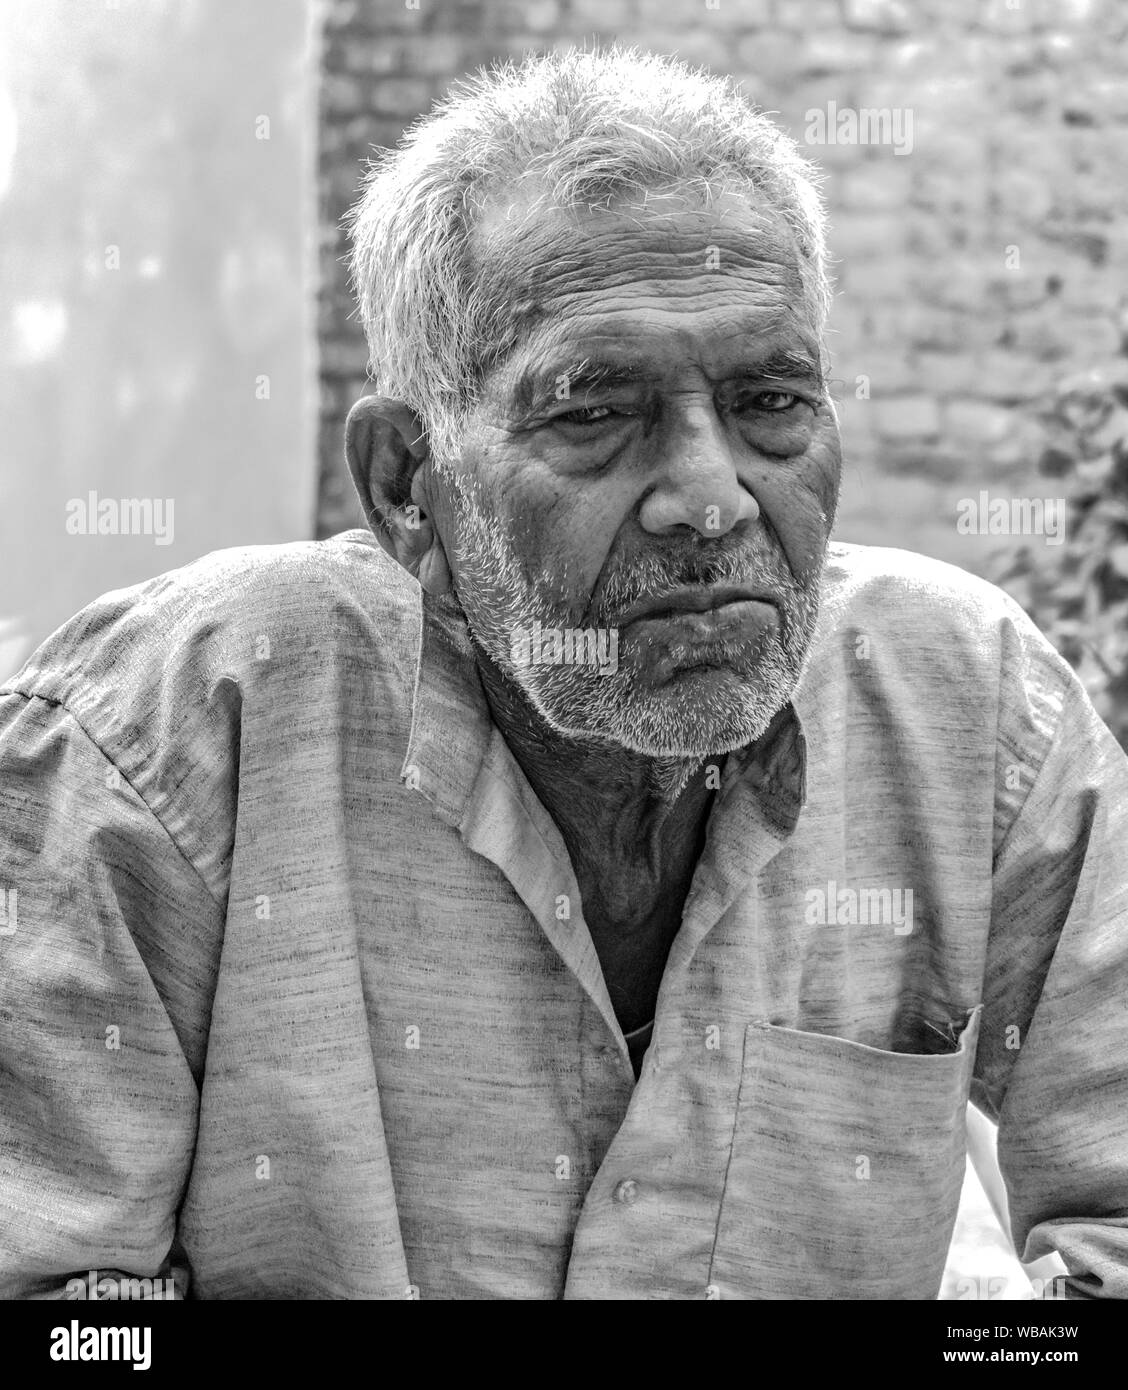 Black and White photo of Superannuated Senior Citizen in his early 80s, with wrinkle on face and neck, thinking deeply & posing with gloomy expression Stock Photo